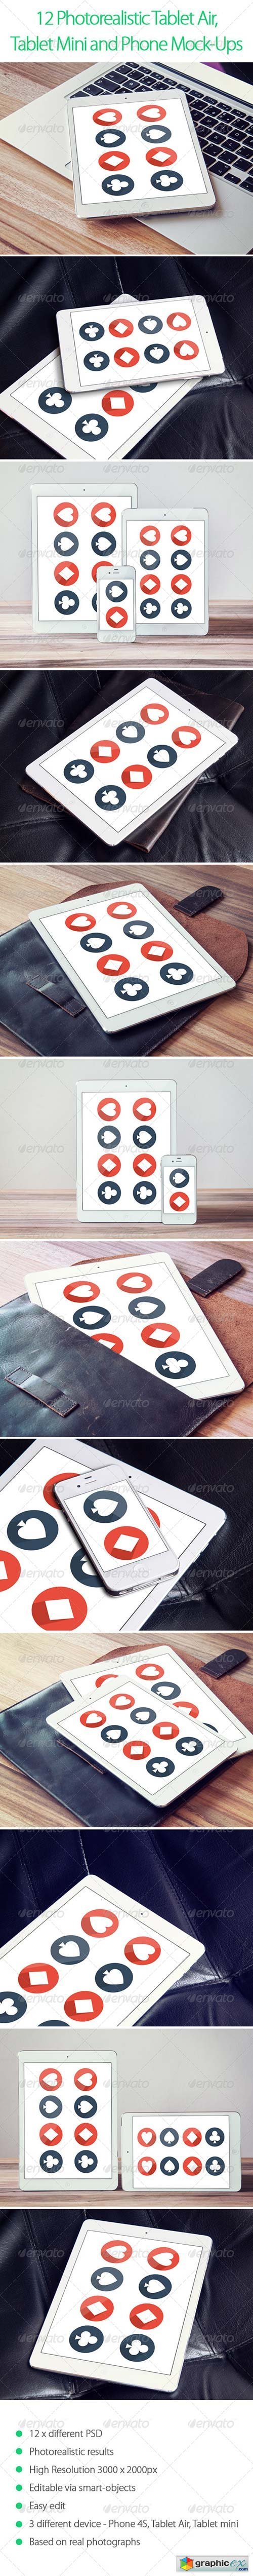 12 Photorealistic Tablet and Phone Mock-Ups